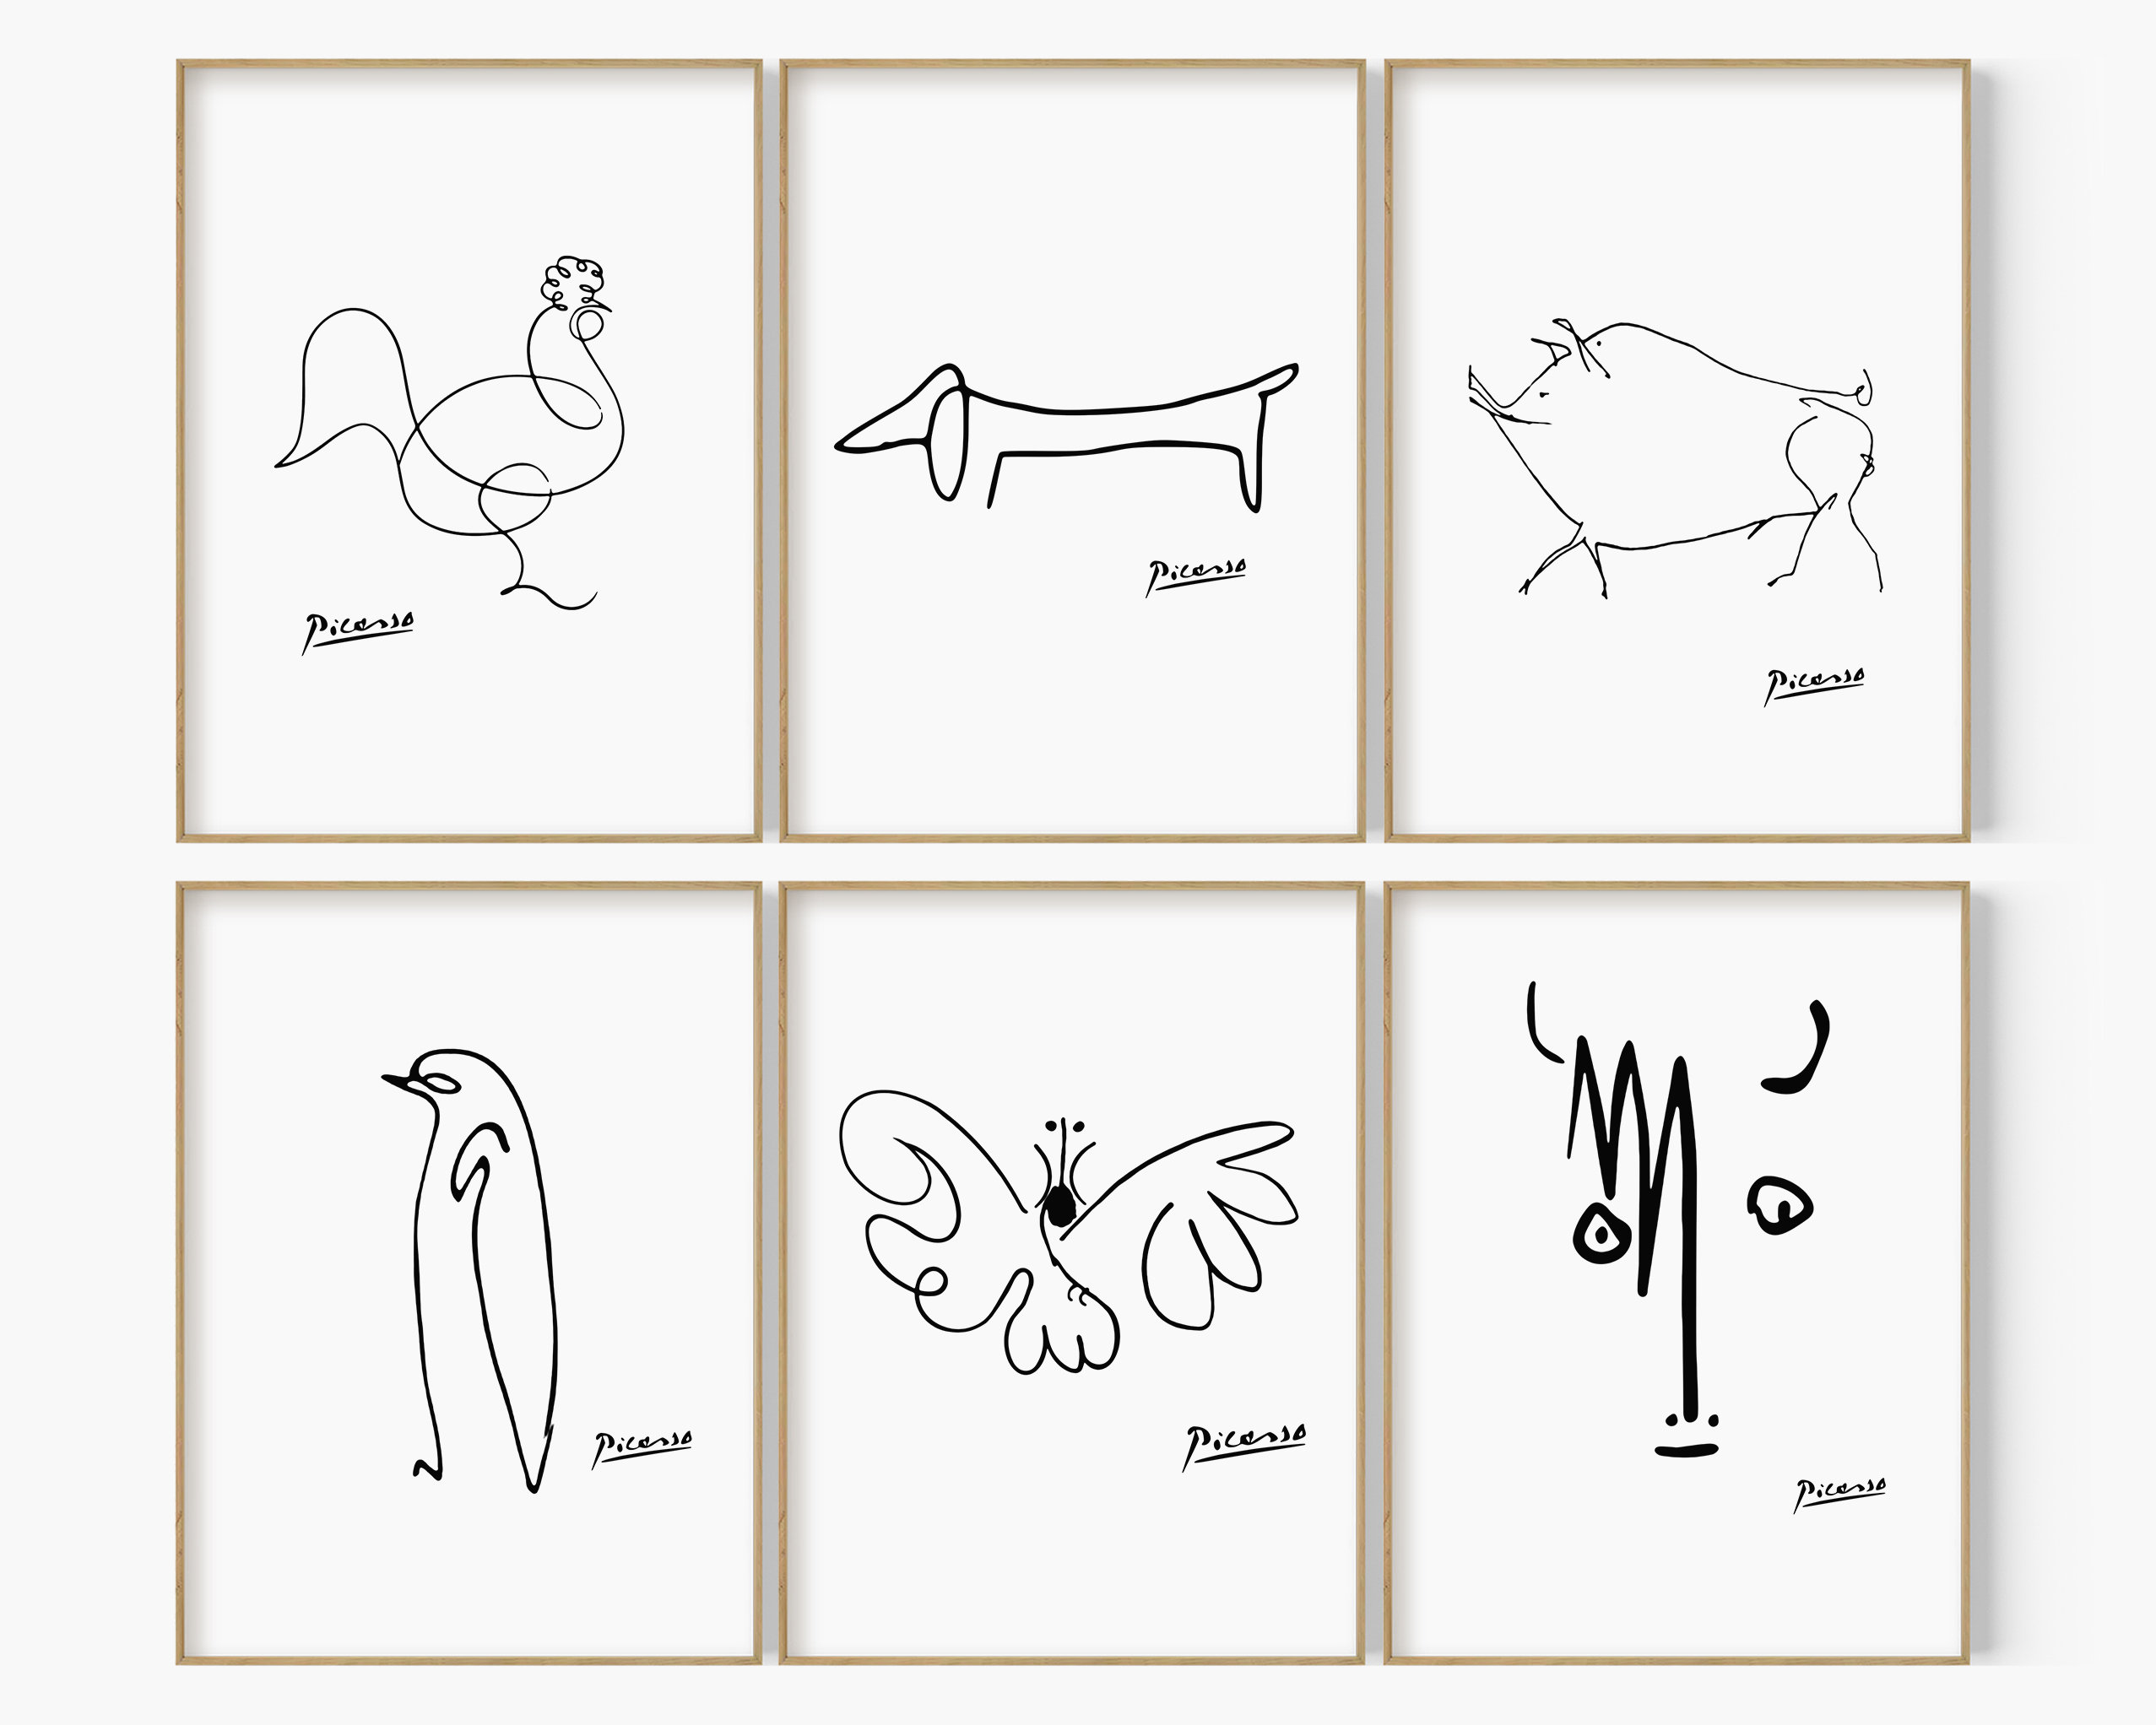 33 Picasso Line Drawings ideas